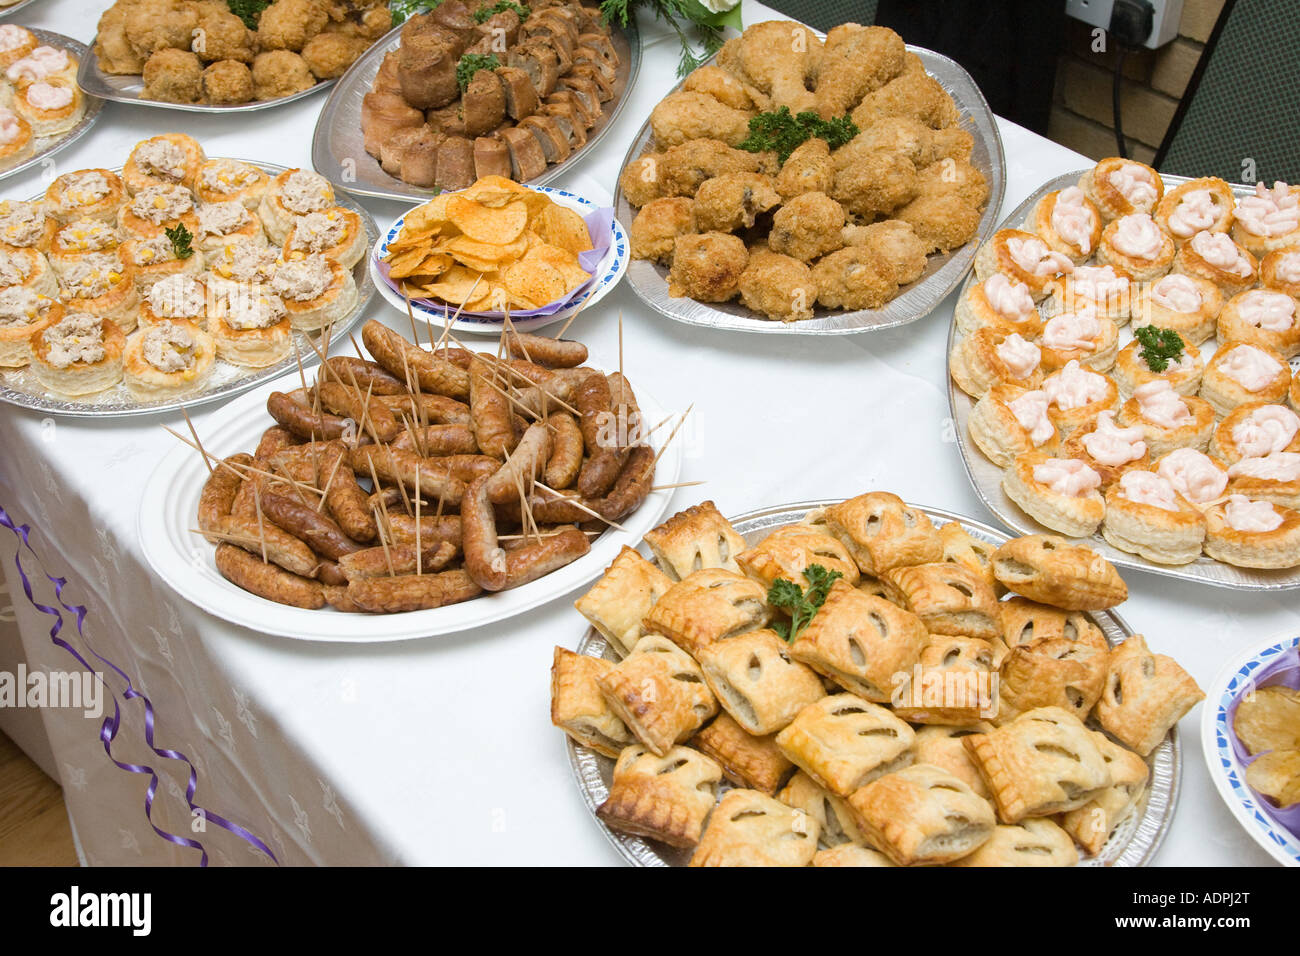 Download this stock image: food buffet table at a wedding reception in the UK - ADPJ2T from Alamy